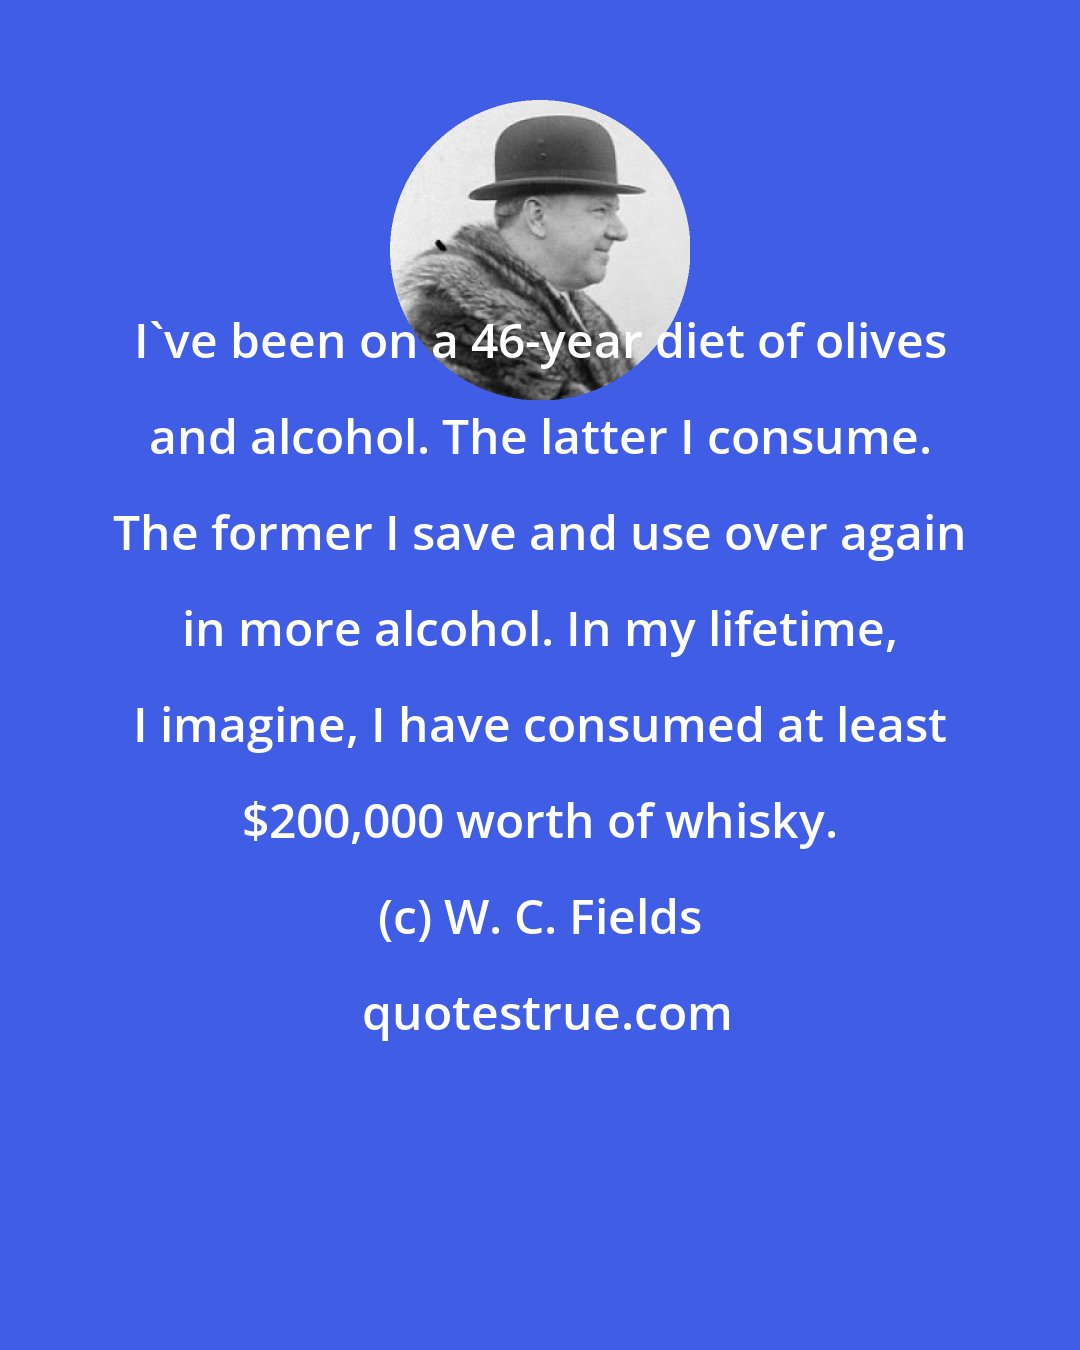 W. C. Fields: I've been on a 46-year diet of olives and alcohol. The latter I consume. The former I save and use over again in more alcohol. In my lifetime, I imagine, I have consumed at least $200,000 worth of whisky.